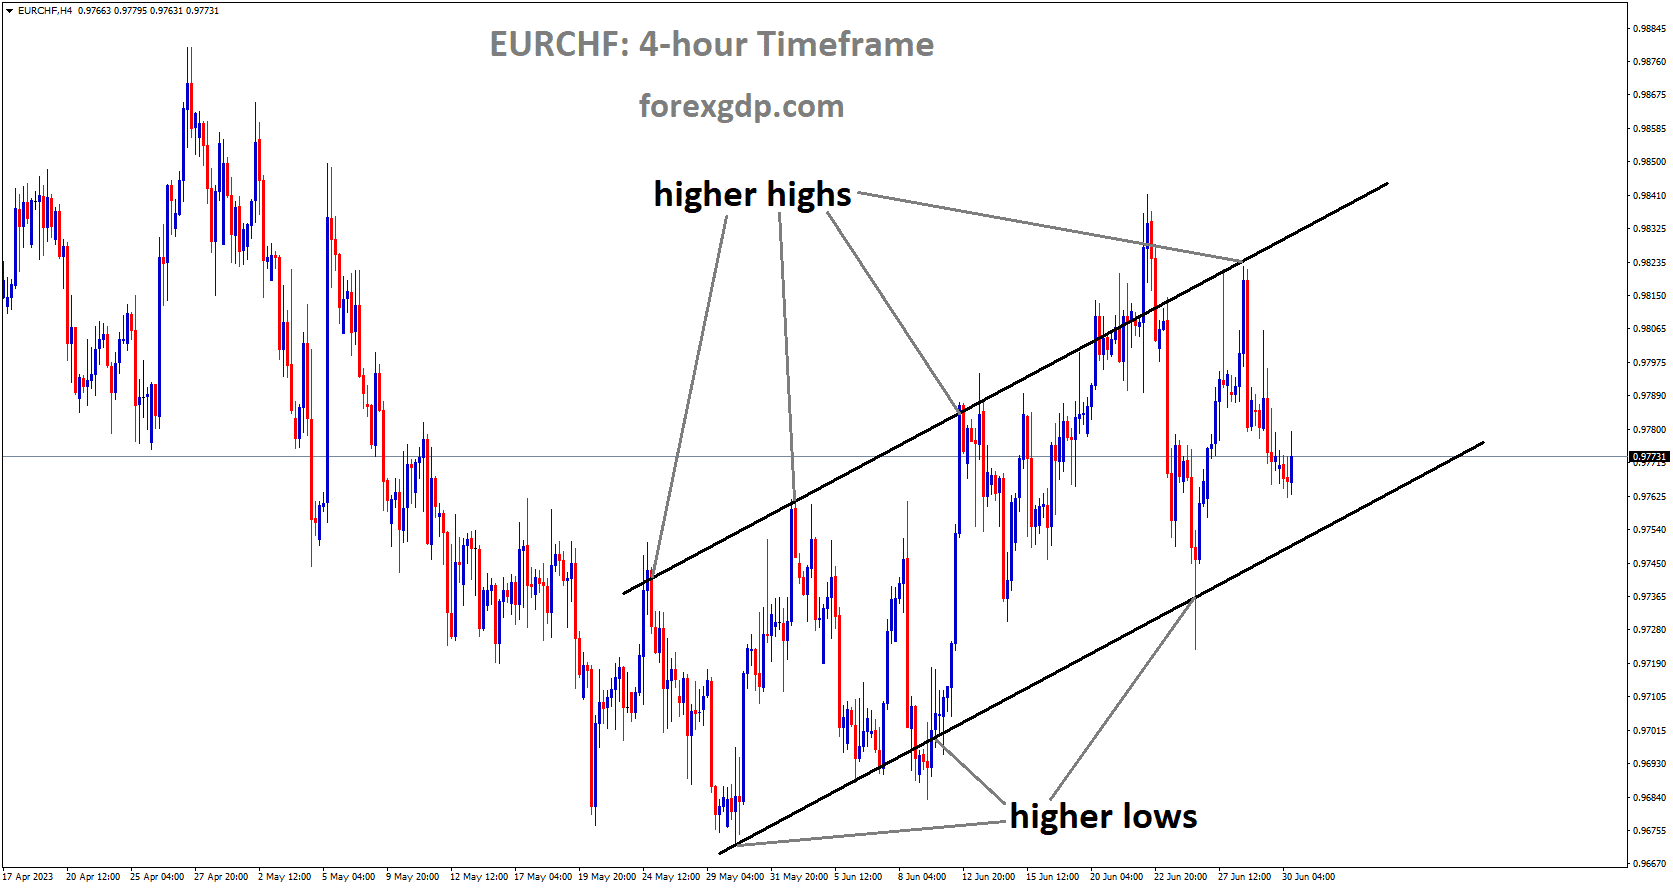 EURCHF is moving an Ascending channel and the market has reached higher low area of the channel.